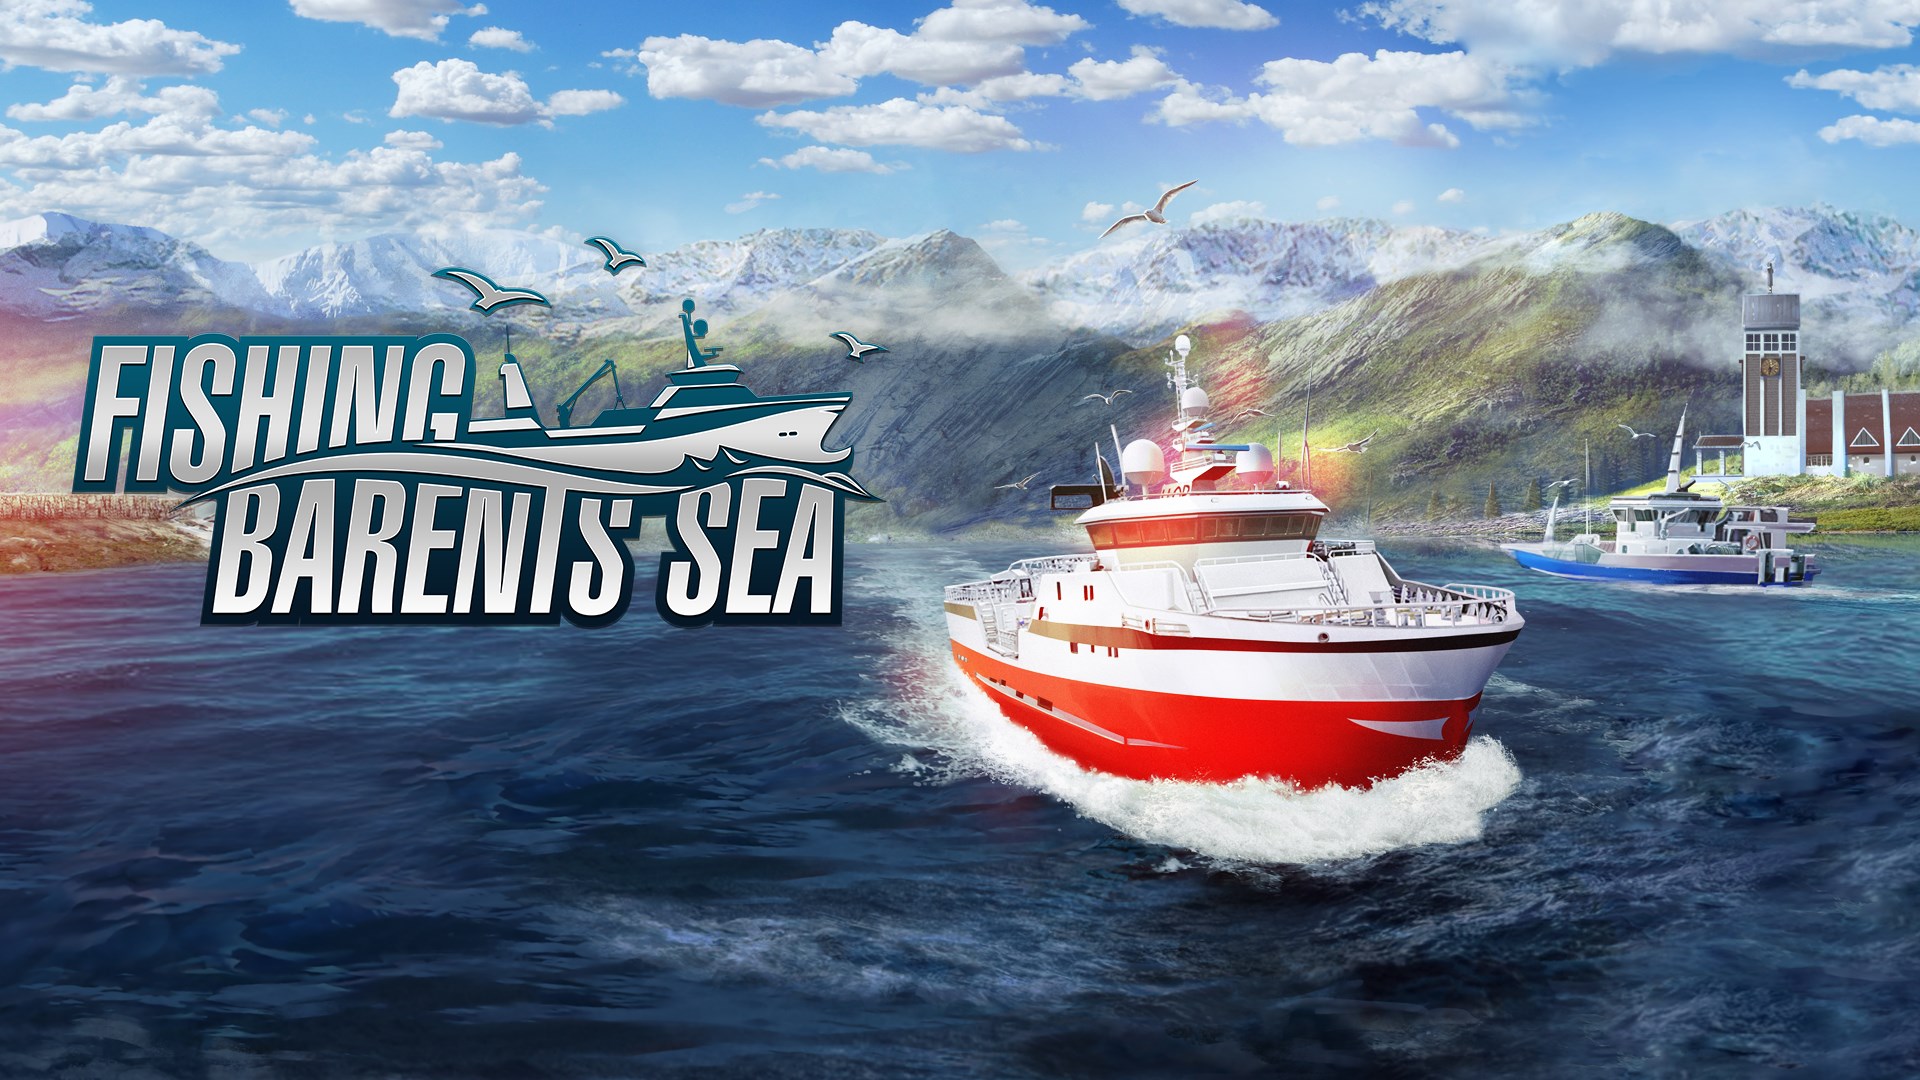 Fishing: Barent's Sea - THE COMPLETE EDITION - Xbox One, PS4, and Switch  versions are now available! 